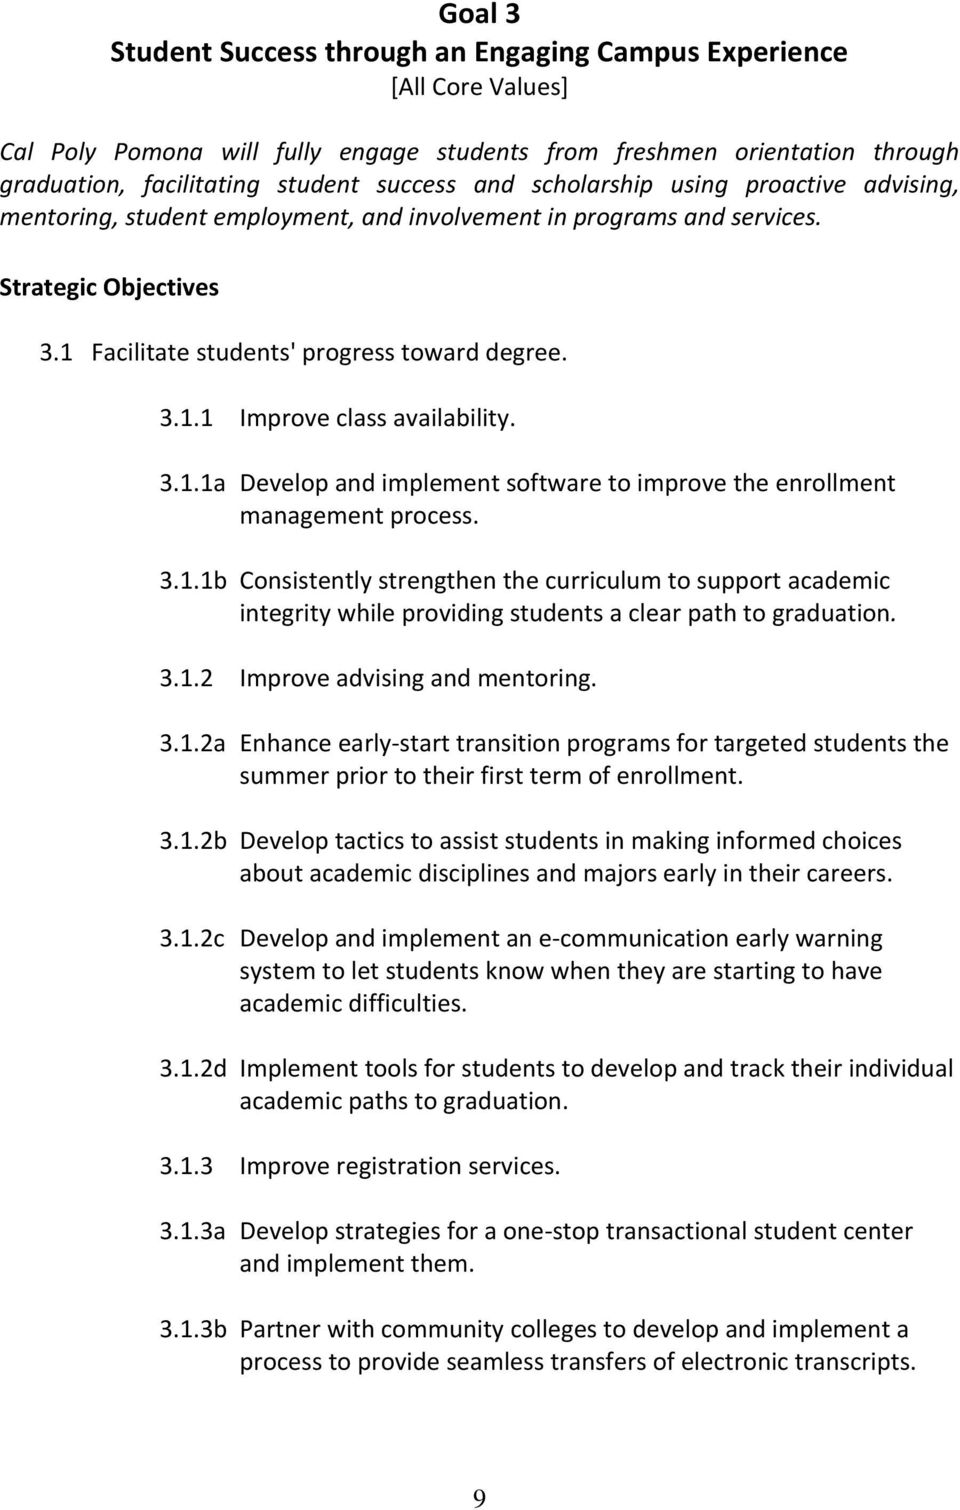 3.1.1a Develop and implement software to improve the enrollment management process. 3.1.1b Consistently strengthen the curriculum to support academic integrity while providing students a clear path to graduation.